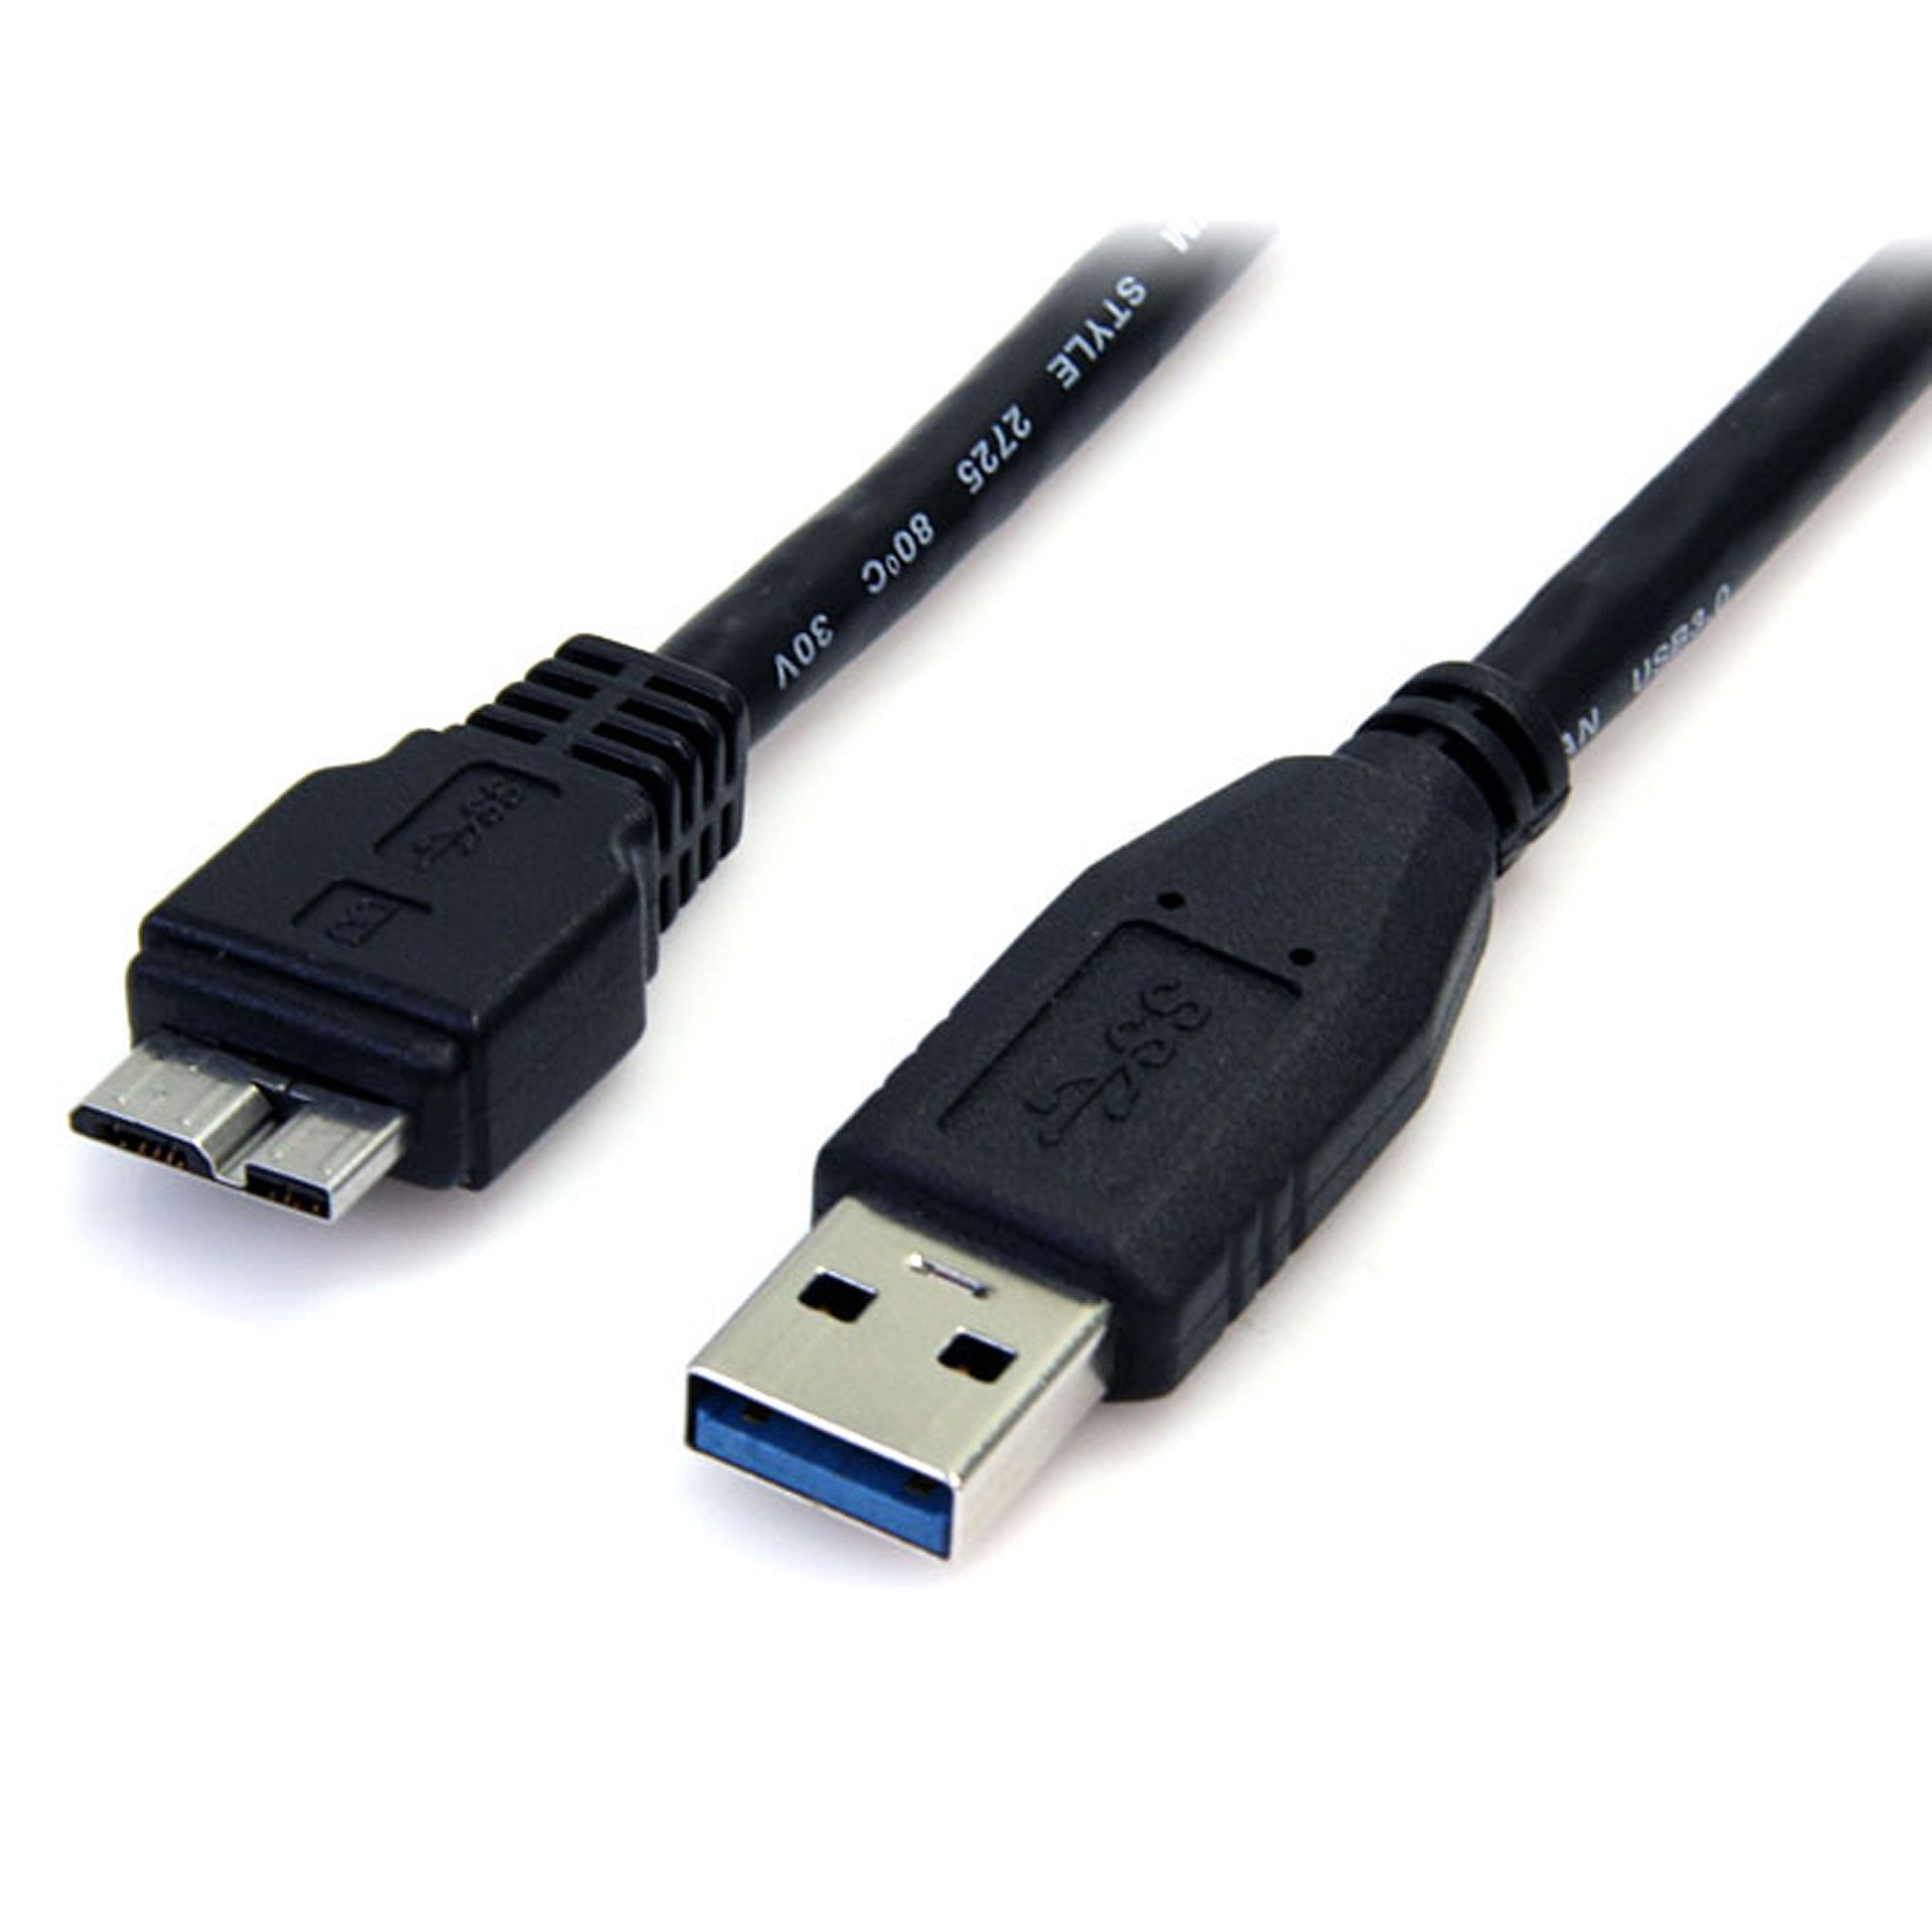 morgenmad Astrolabe Videnskab 0.5m 1.5ft Black USB 3.0 Micro B Cable - USB 3.0 Cables | StarTech.com